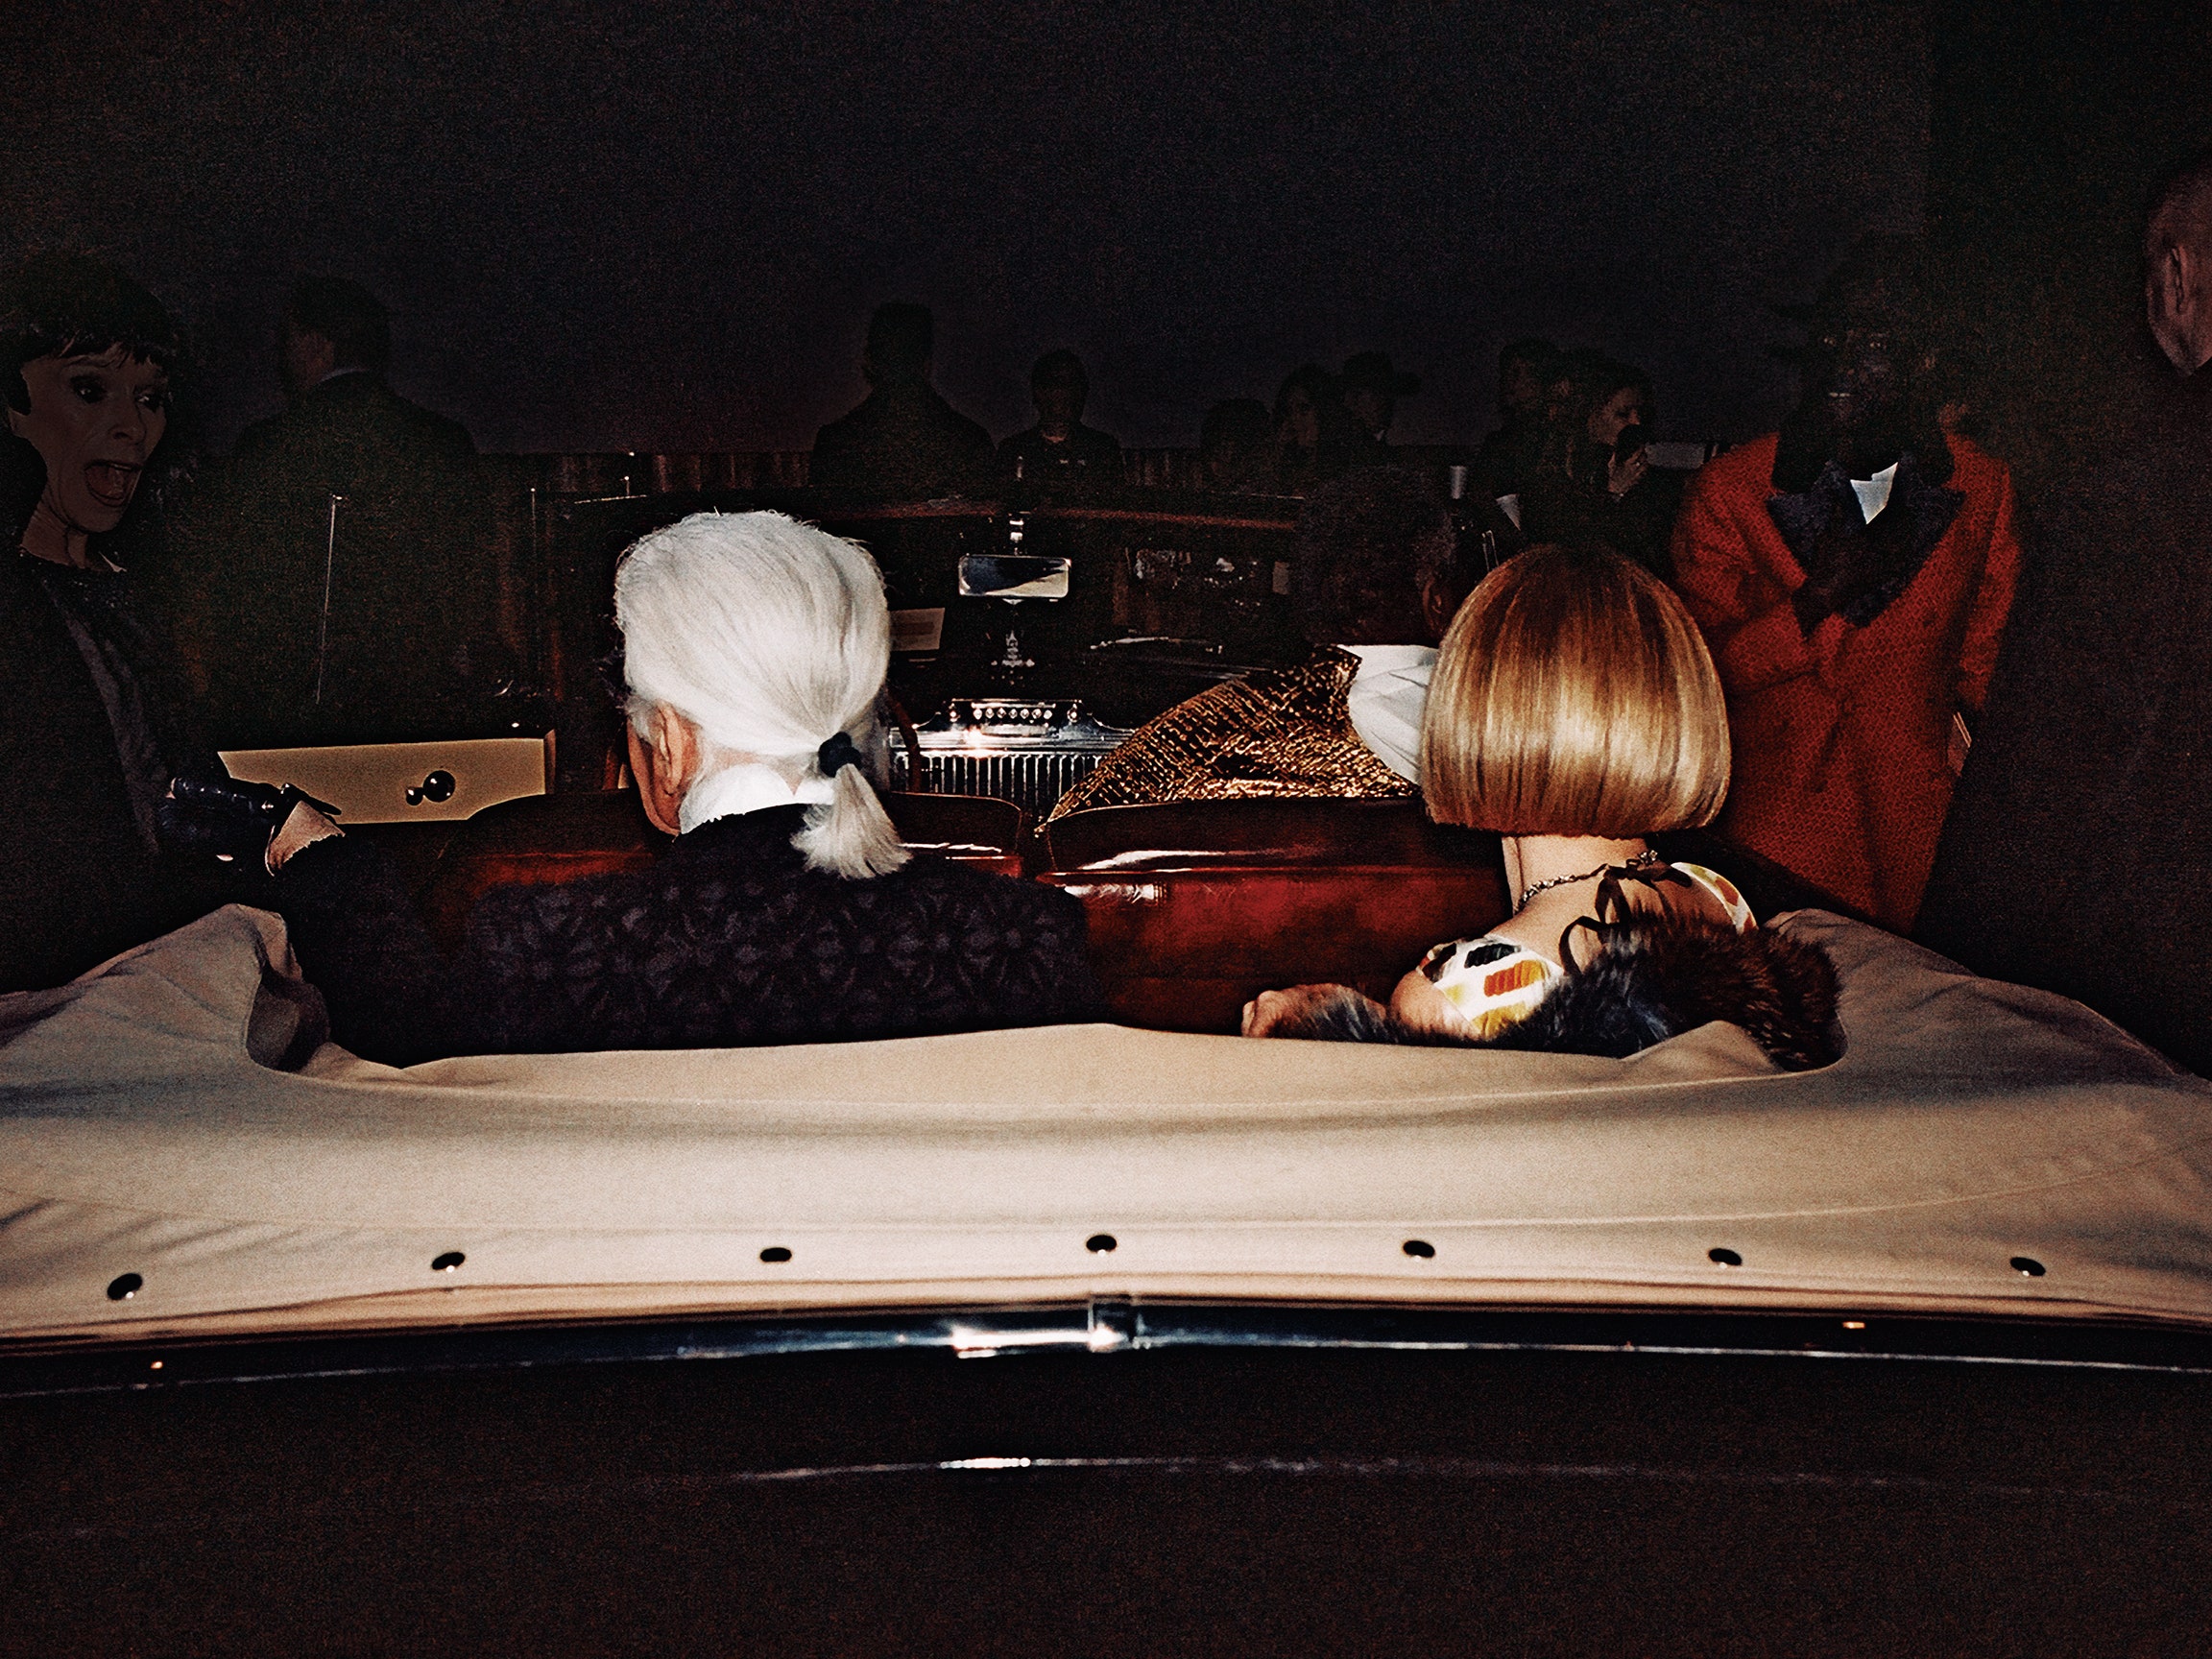 TAKE THE WHEEL Wintour with Lagerfeld at the drivein theater Chanel staged in Dallas 2013.